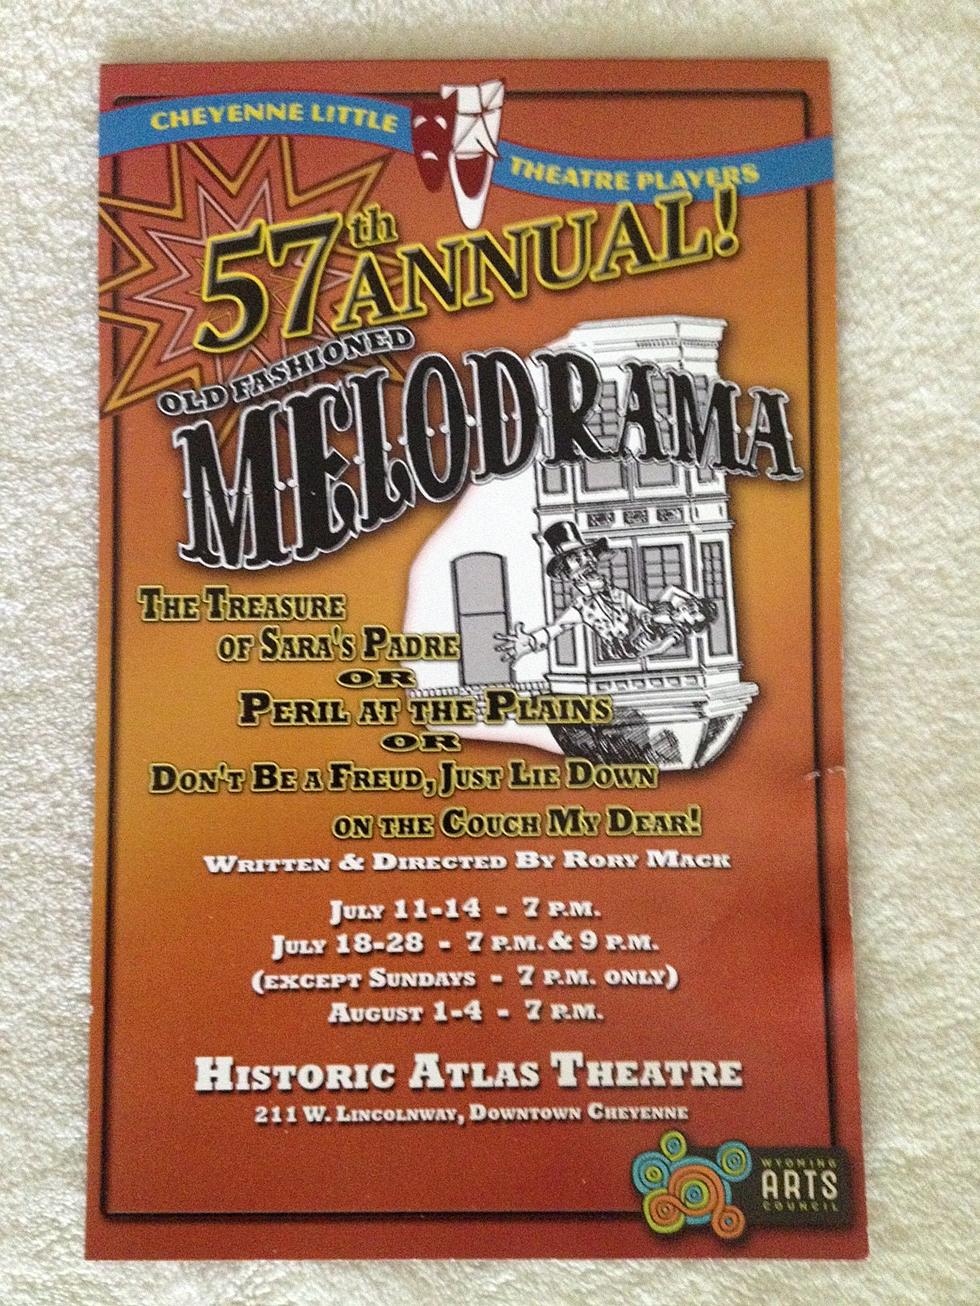 Old-Fashioned Melodrama’s 57th Season Continues at Historic Atlas Theatre